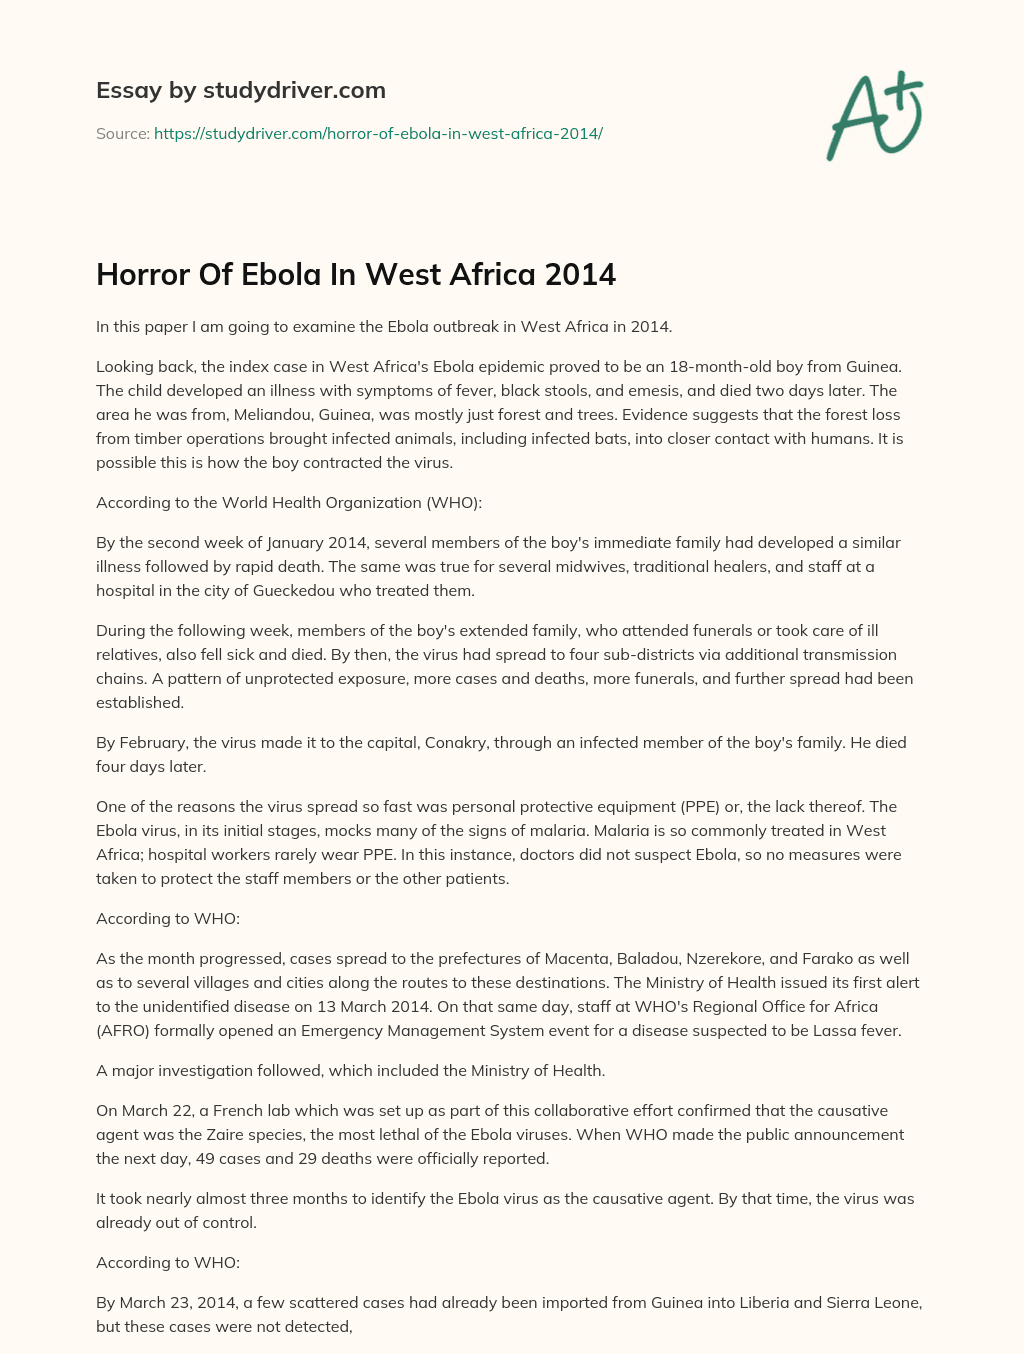 Horror of Ebola in West Africa 2014 essay